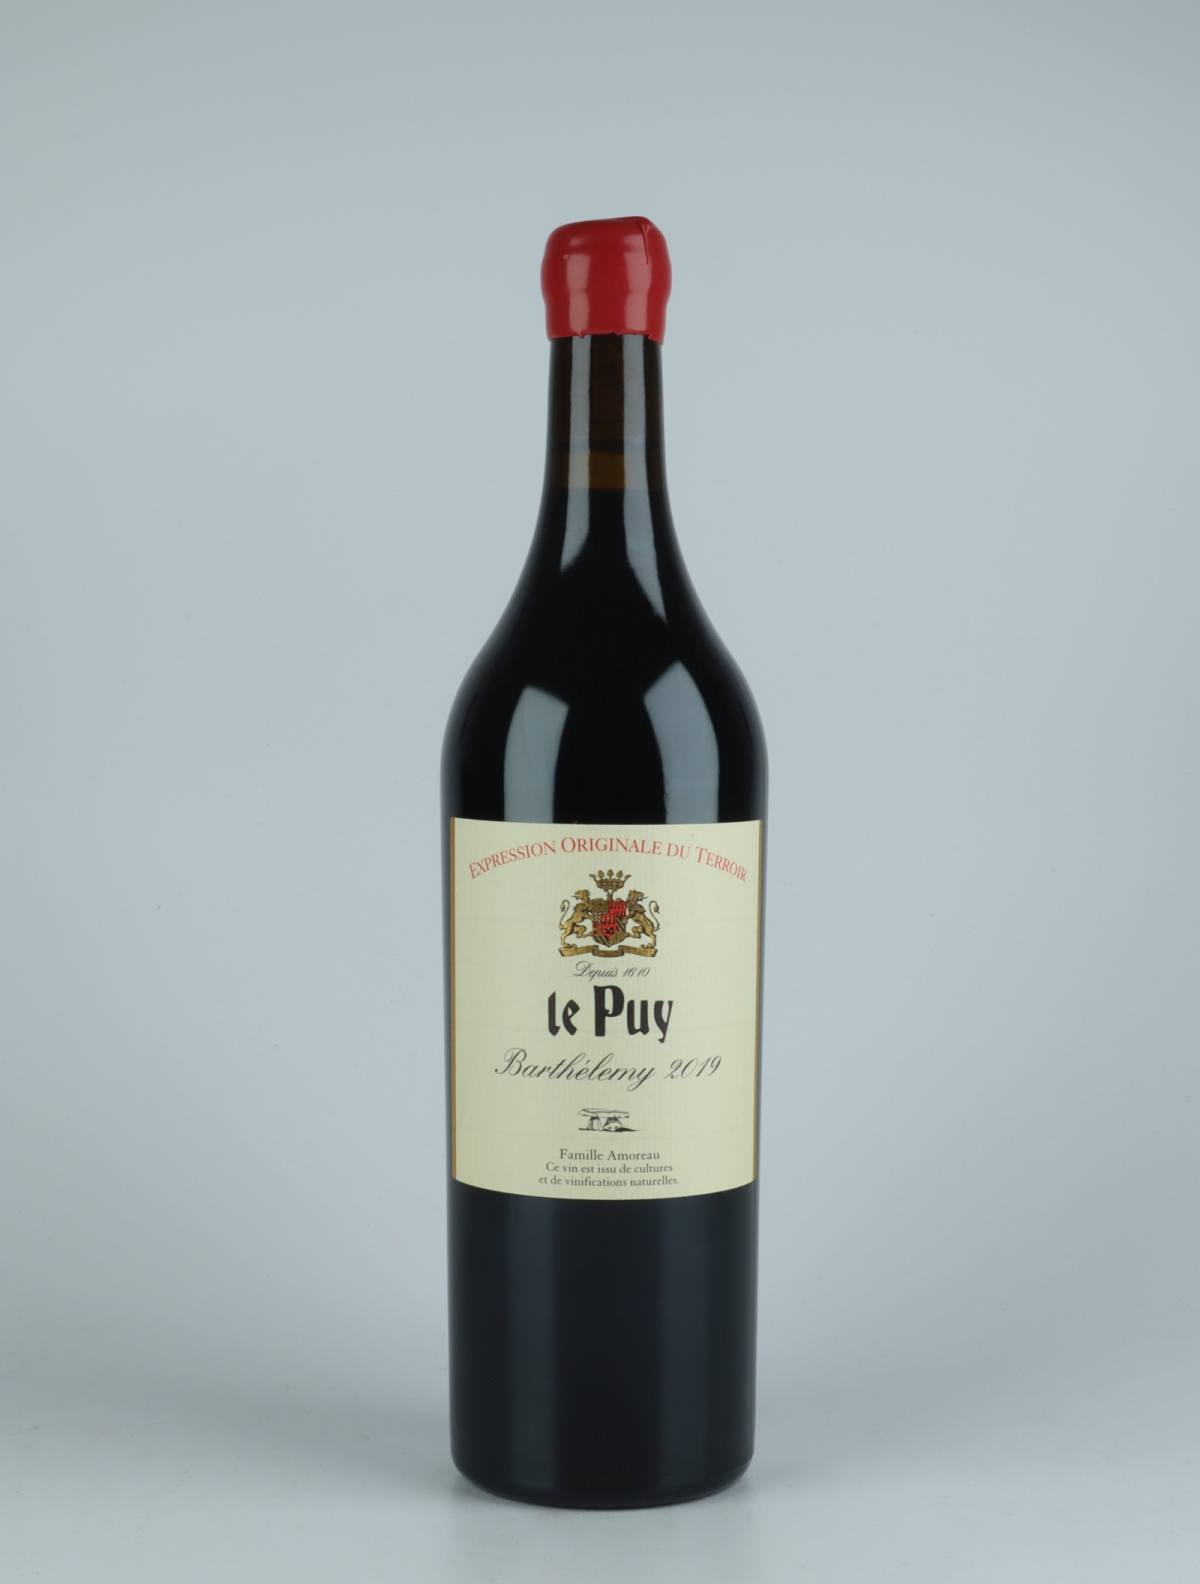 A bottle 2019 Barthélemy Red wine from Château le Puy, Bordeaux in France